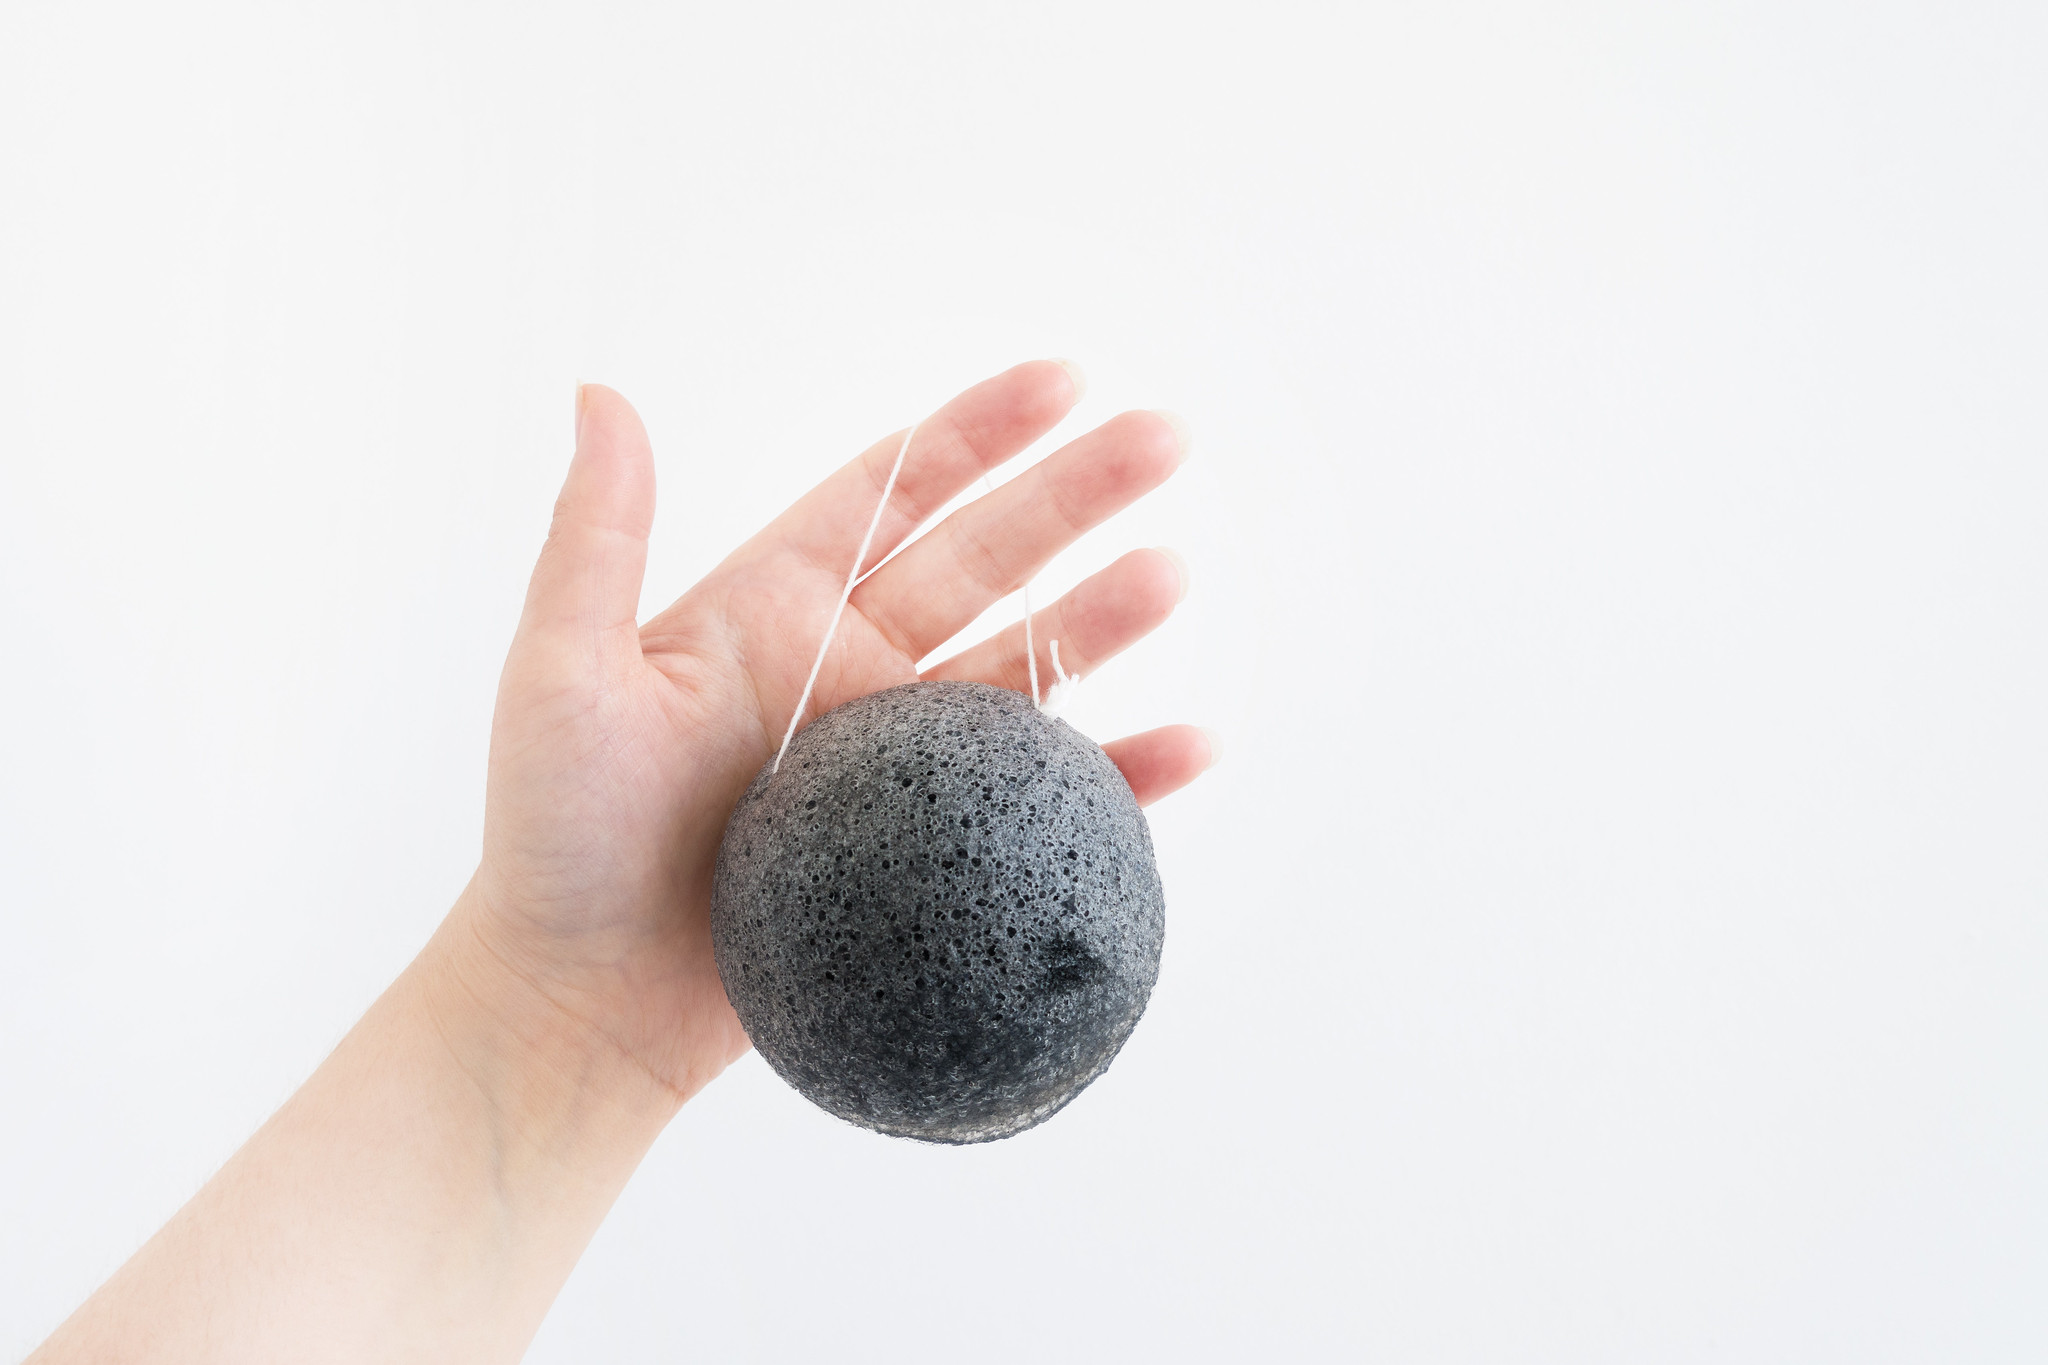 Konjac Sponges: The Benefits and How To Use One